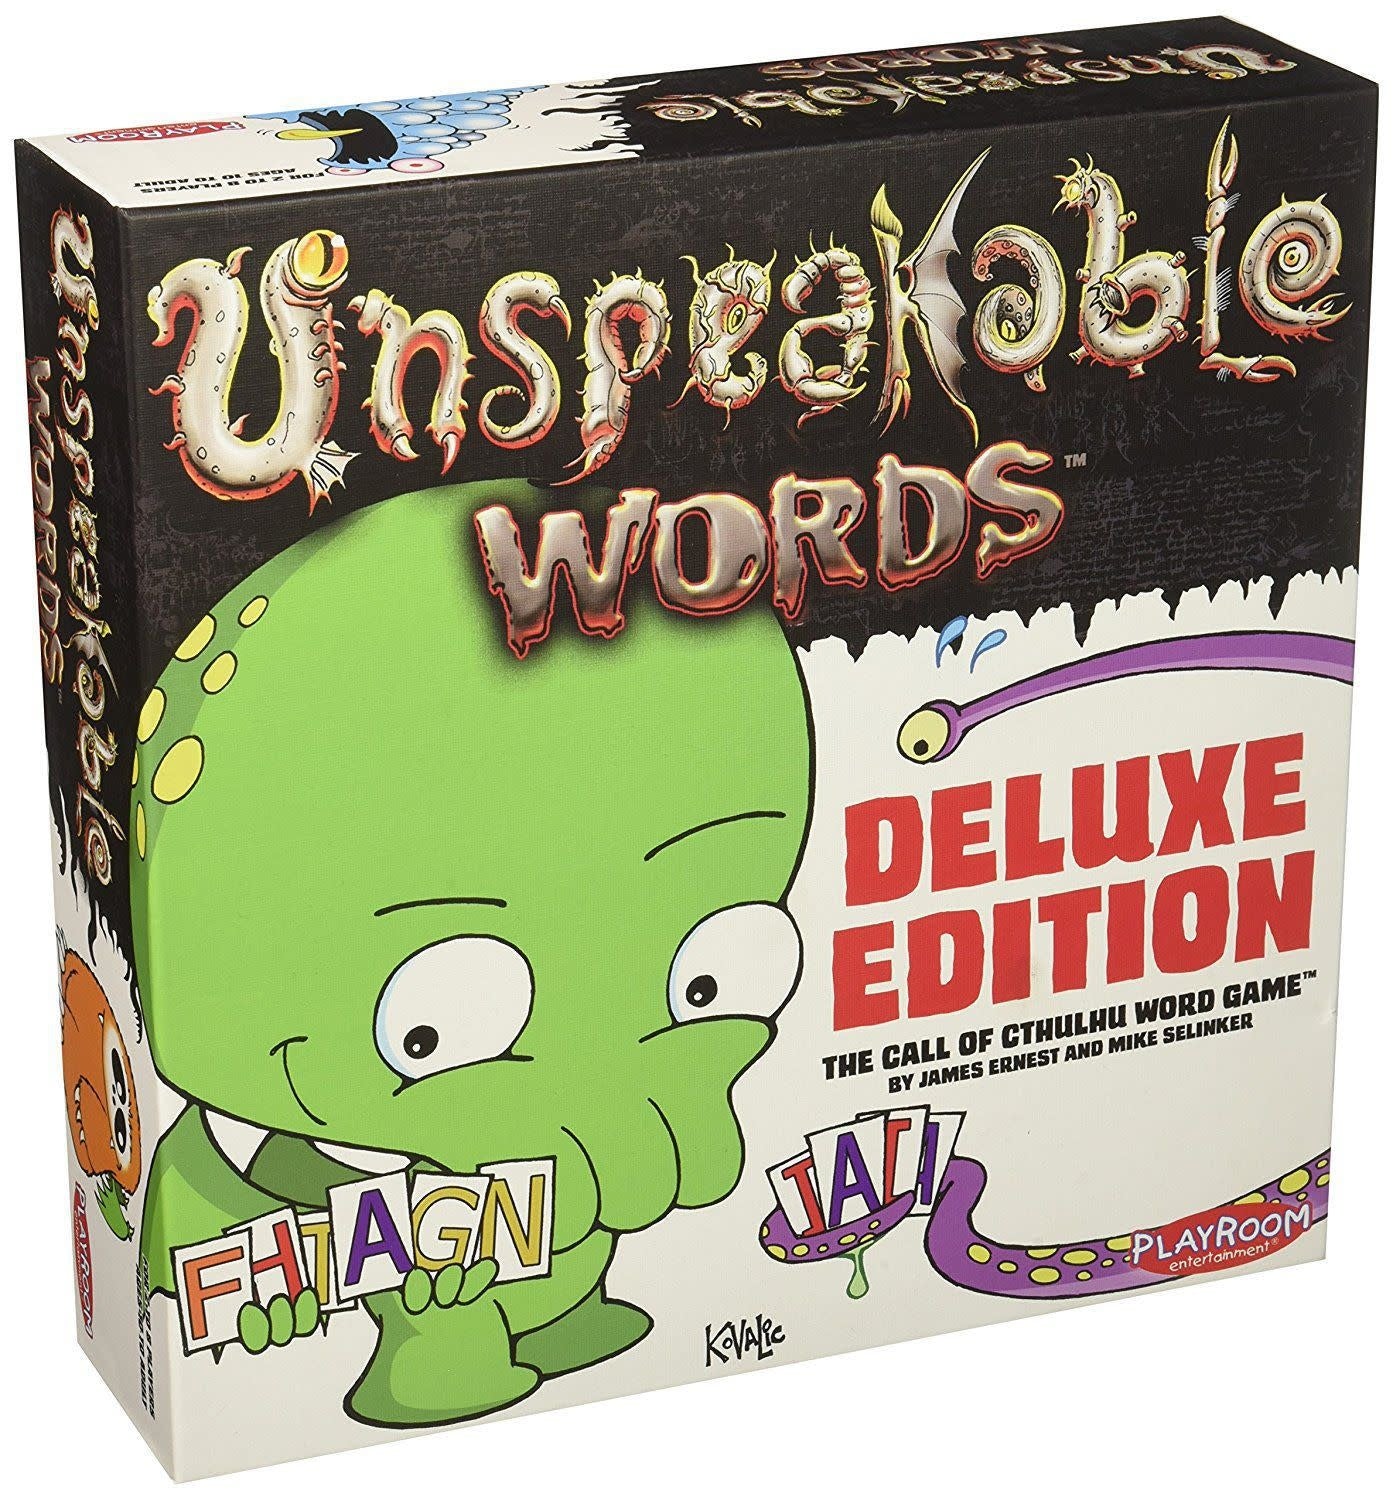 Table Top Cafe Unspeakable Words: Deluxe